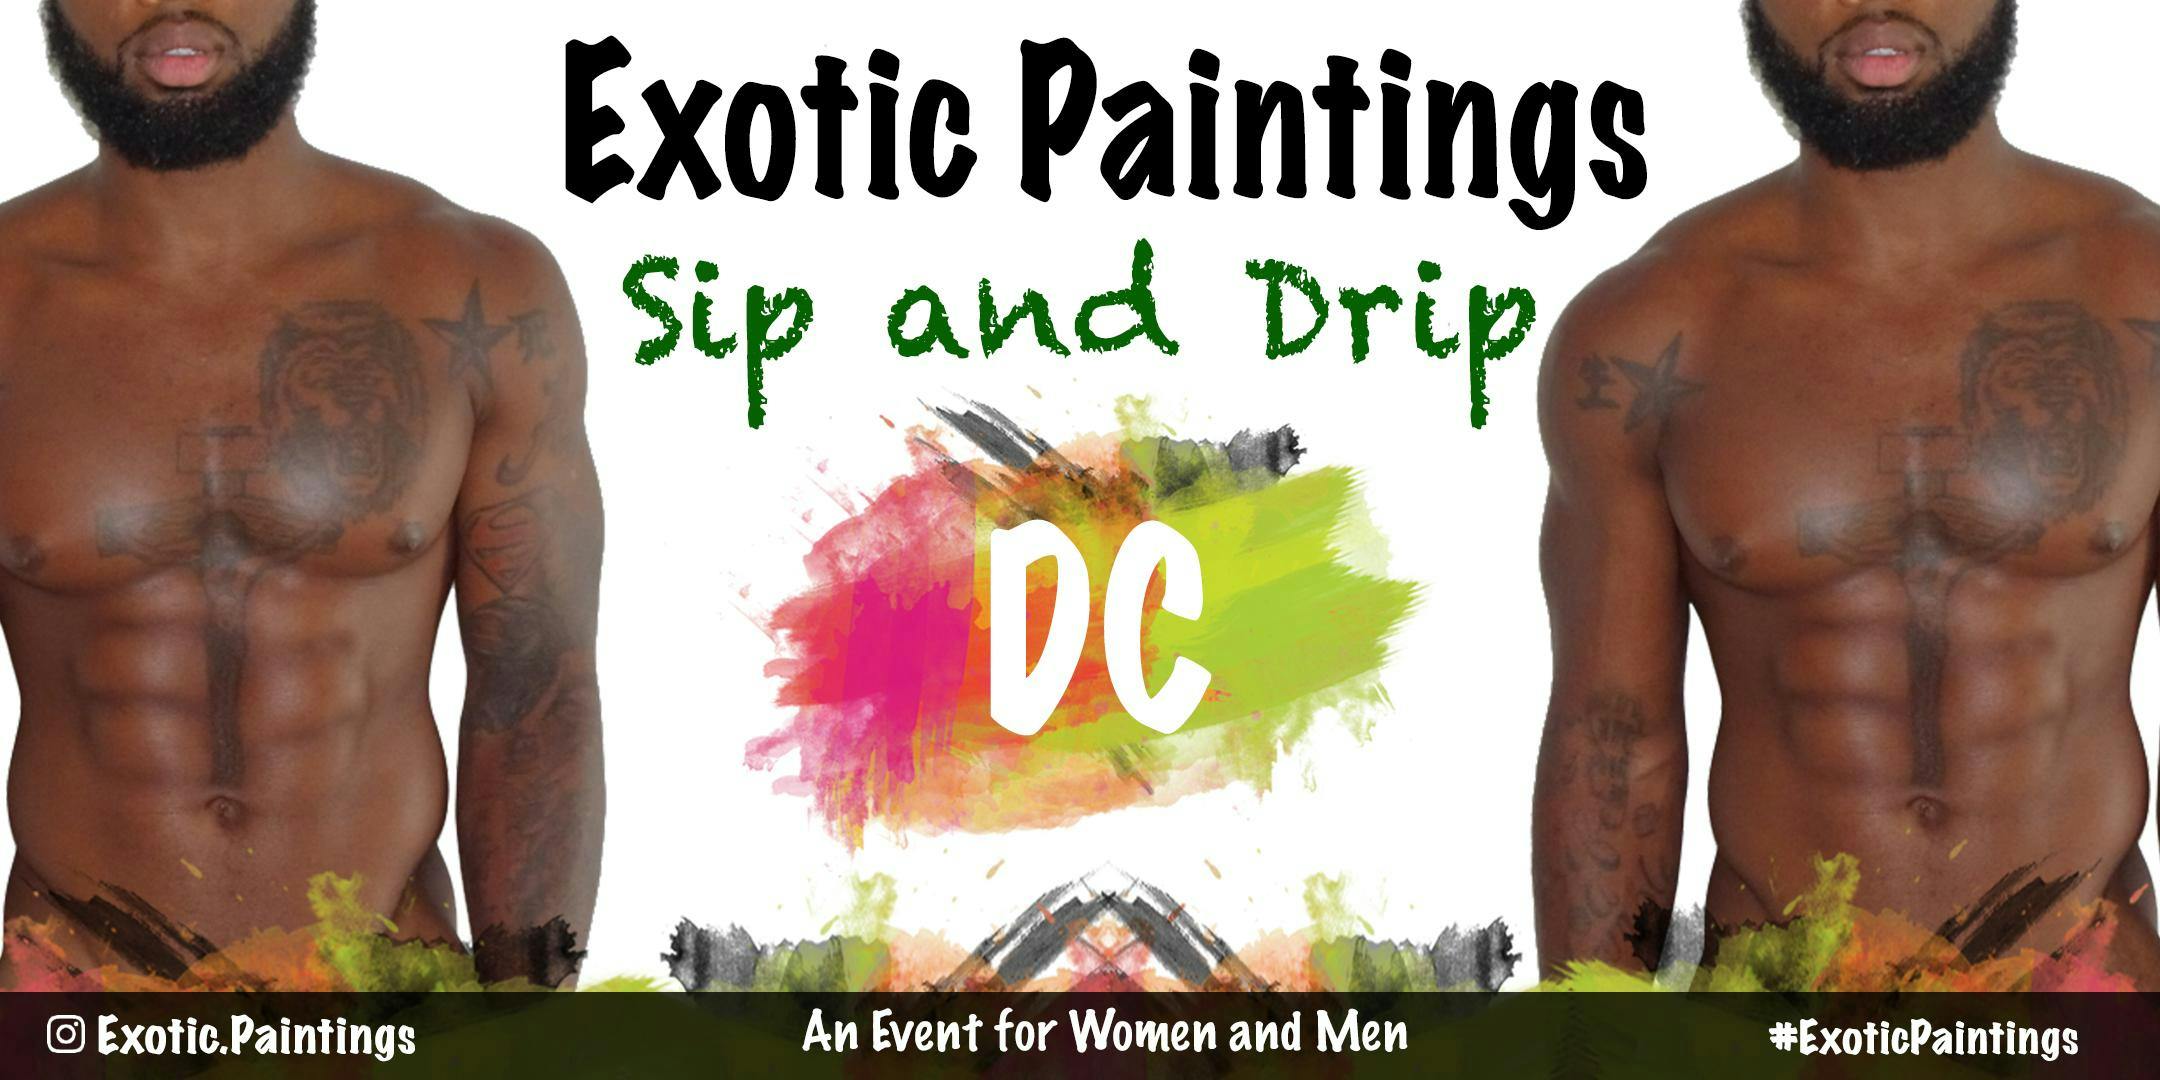 Exotic paint and sip